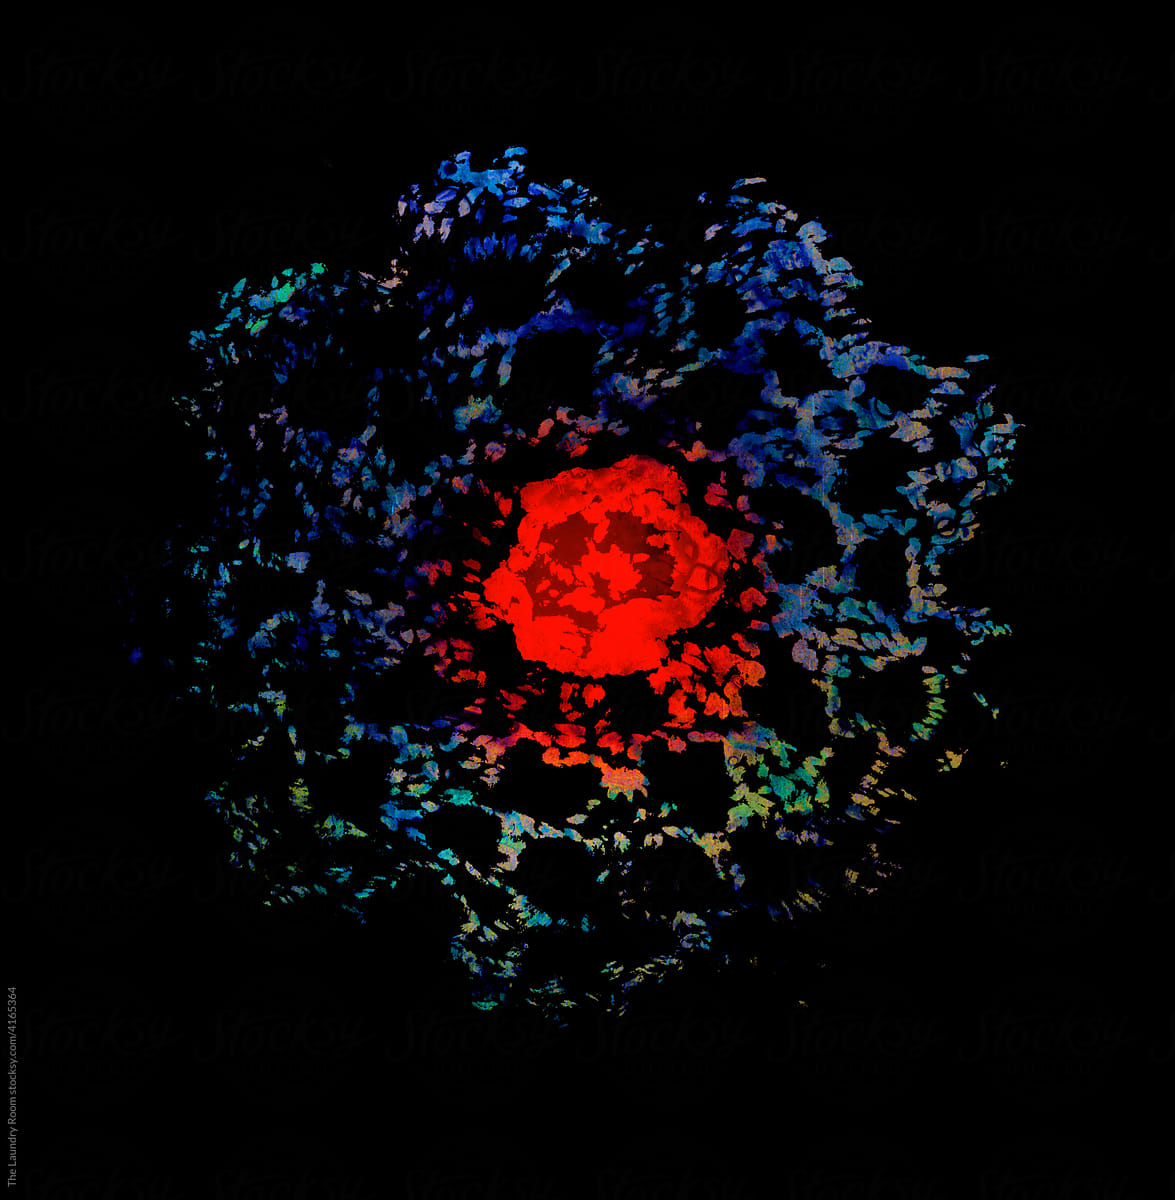 Lace Floral Ink Circle with Glowing Red Centre